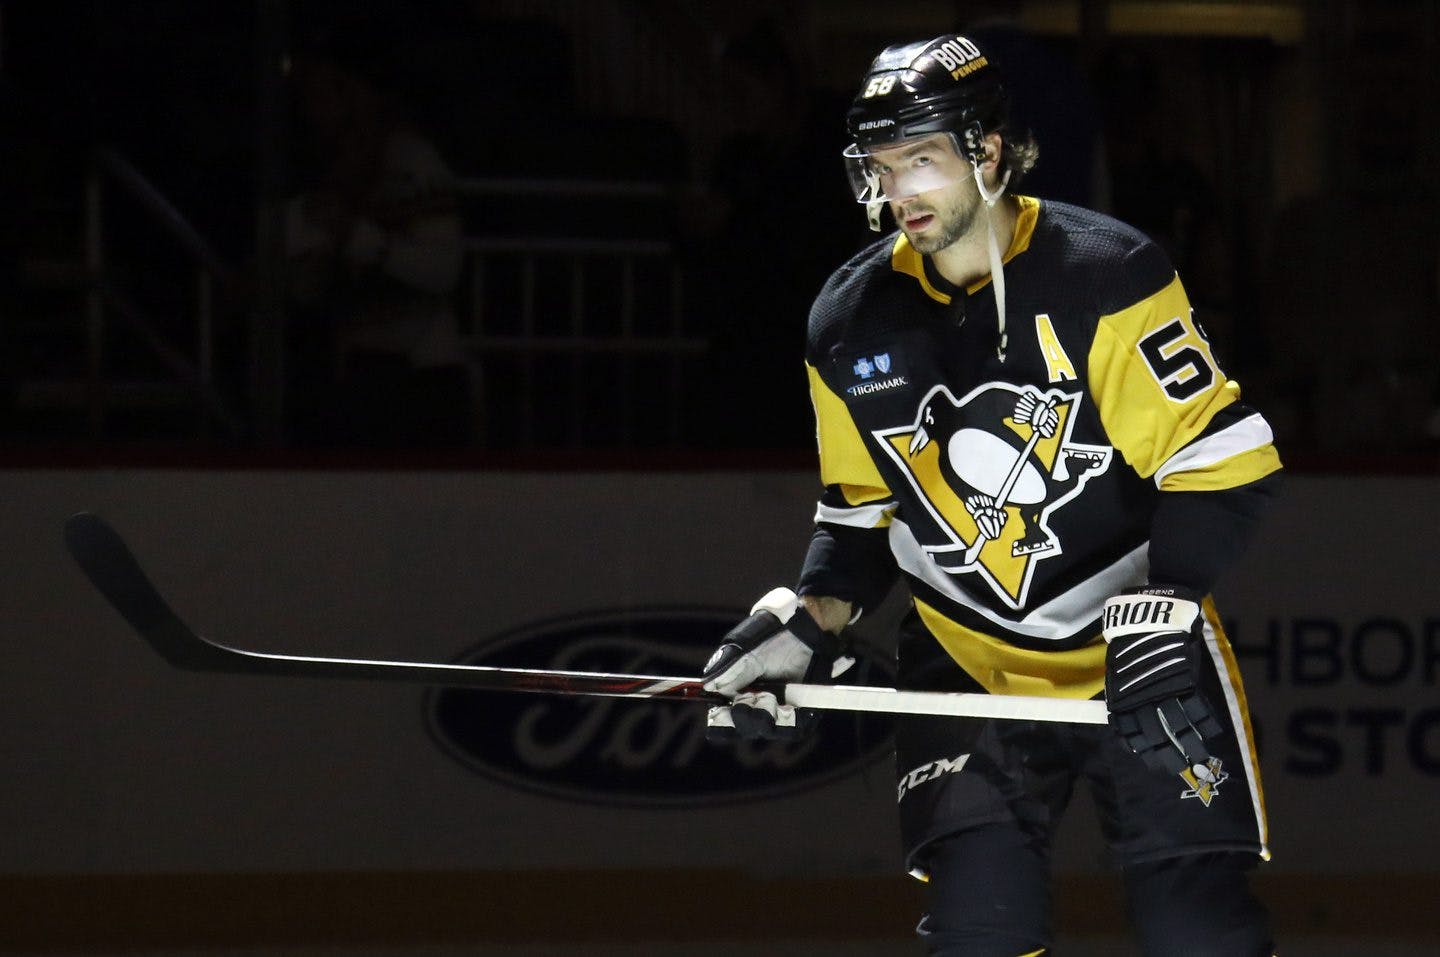 With Kris Letang day-to-day, the Penguins face life without him … again